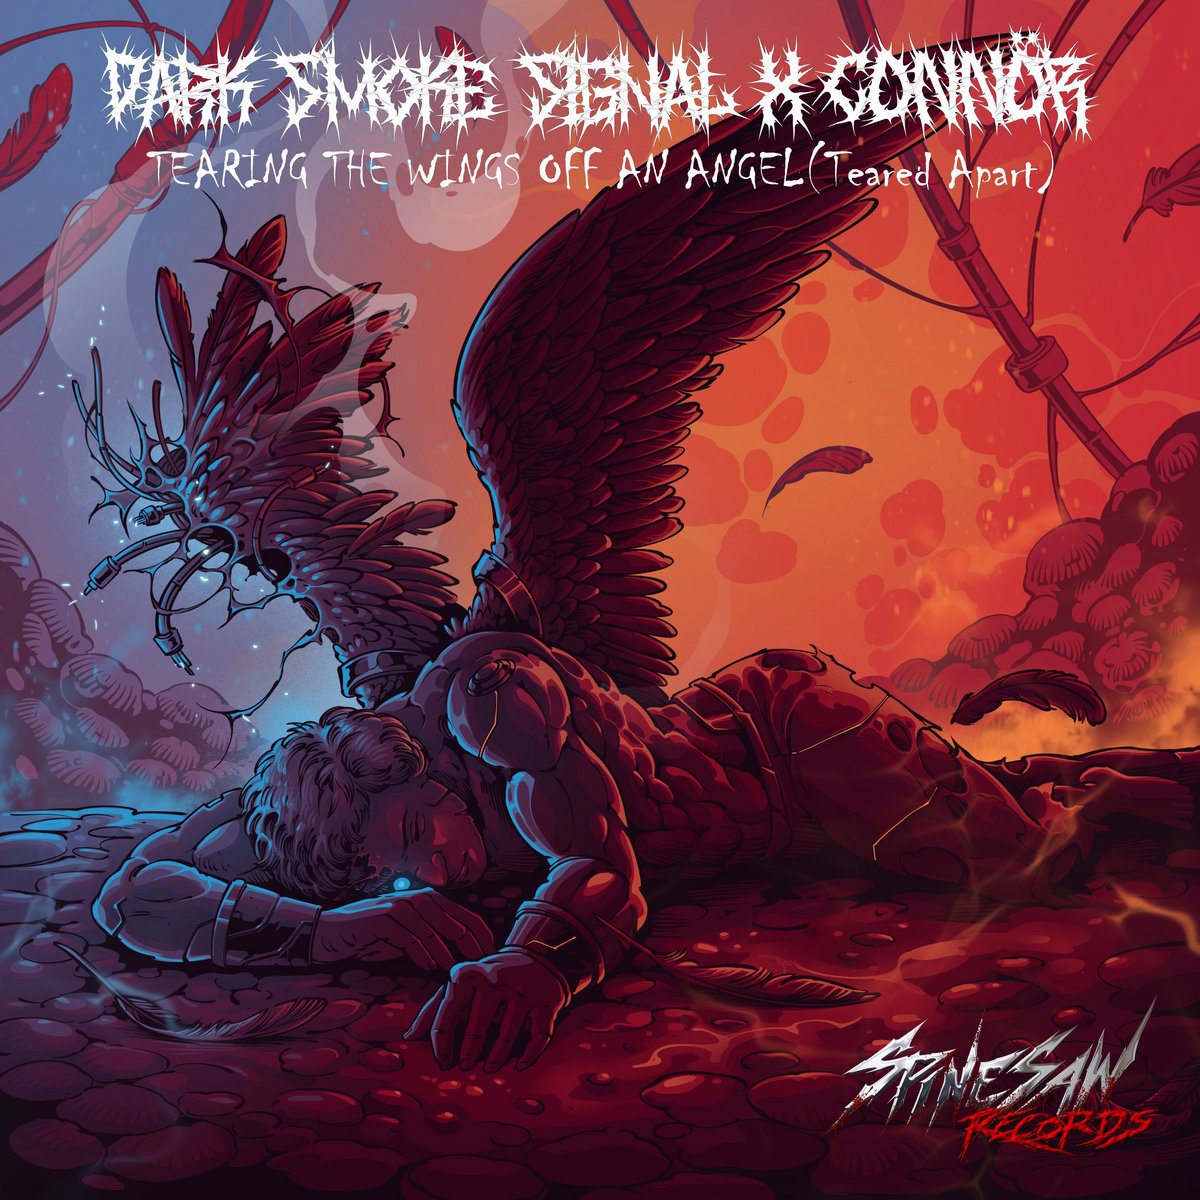 Two great artists in #darksynth collide with blazing fury with TEARING THE WINGS OFF AN ANGEL (TEARED APART) by @connor_retro & @DarkSmokeSignal! open.spotify.com/track/4PaiyOv9… darksmokesignal.bandcamp.com/album/tearing-… connoer.bandcamp.com #synthwave #synthwaveultra